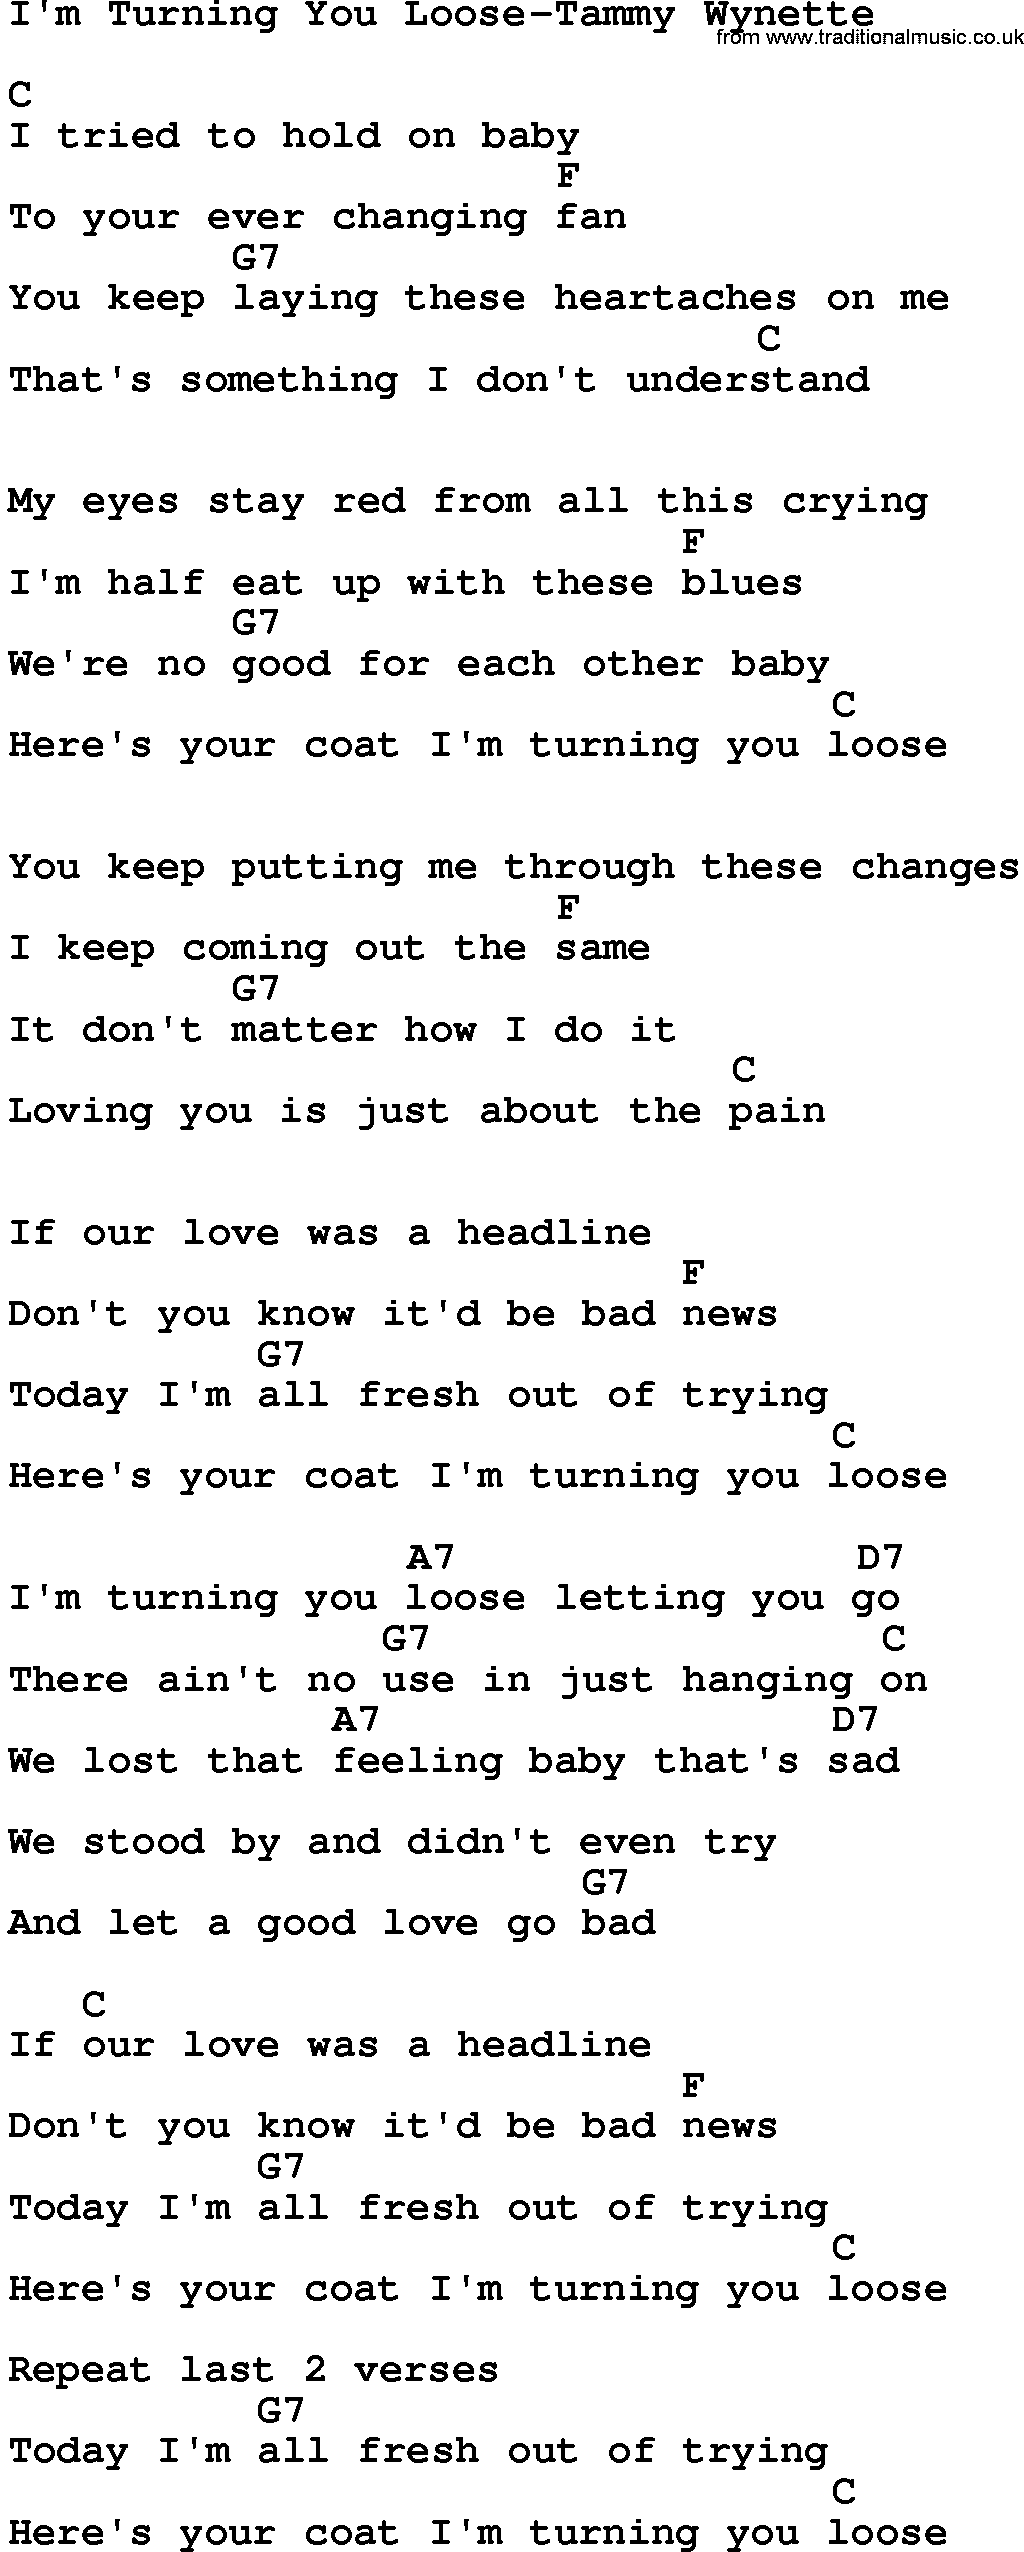 Country music song: I'm Turning You Loose-Tammy Wynette lyrics and chords